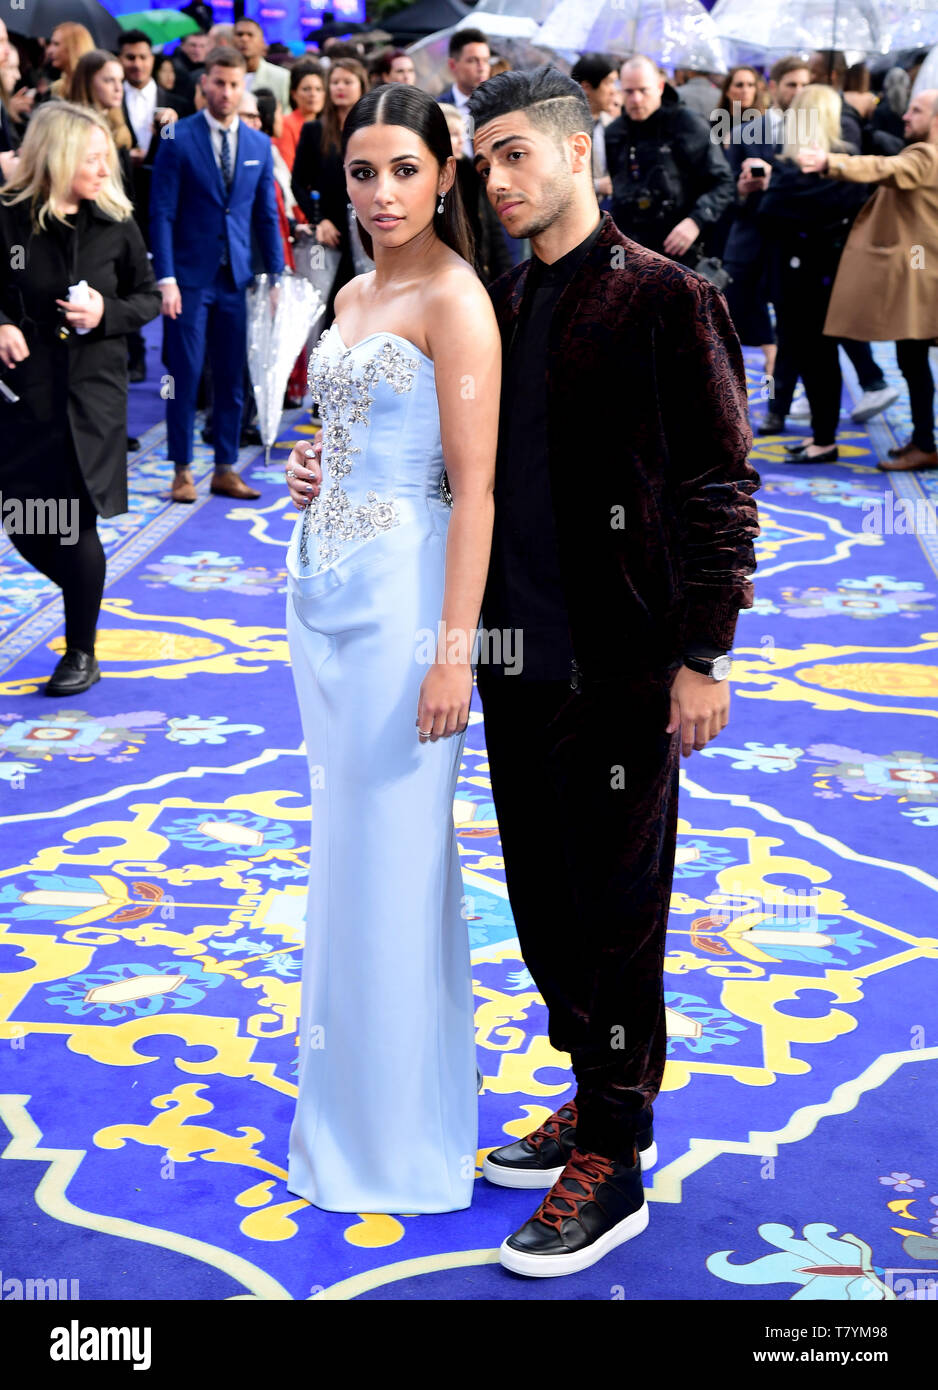 Naomi Scott and Mena Massoud attending the Aladdin European Premiere held at the Odeon Luxe Leicester Square, London. Stock Photo